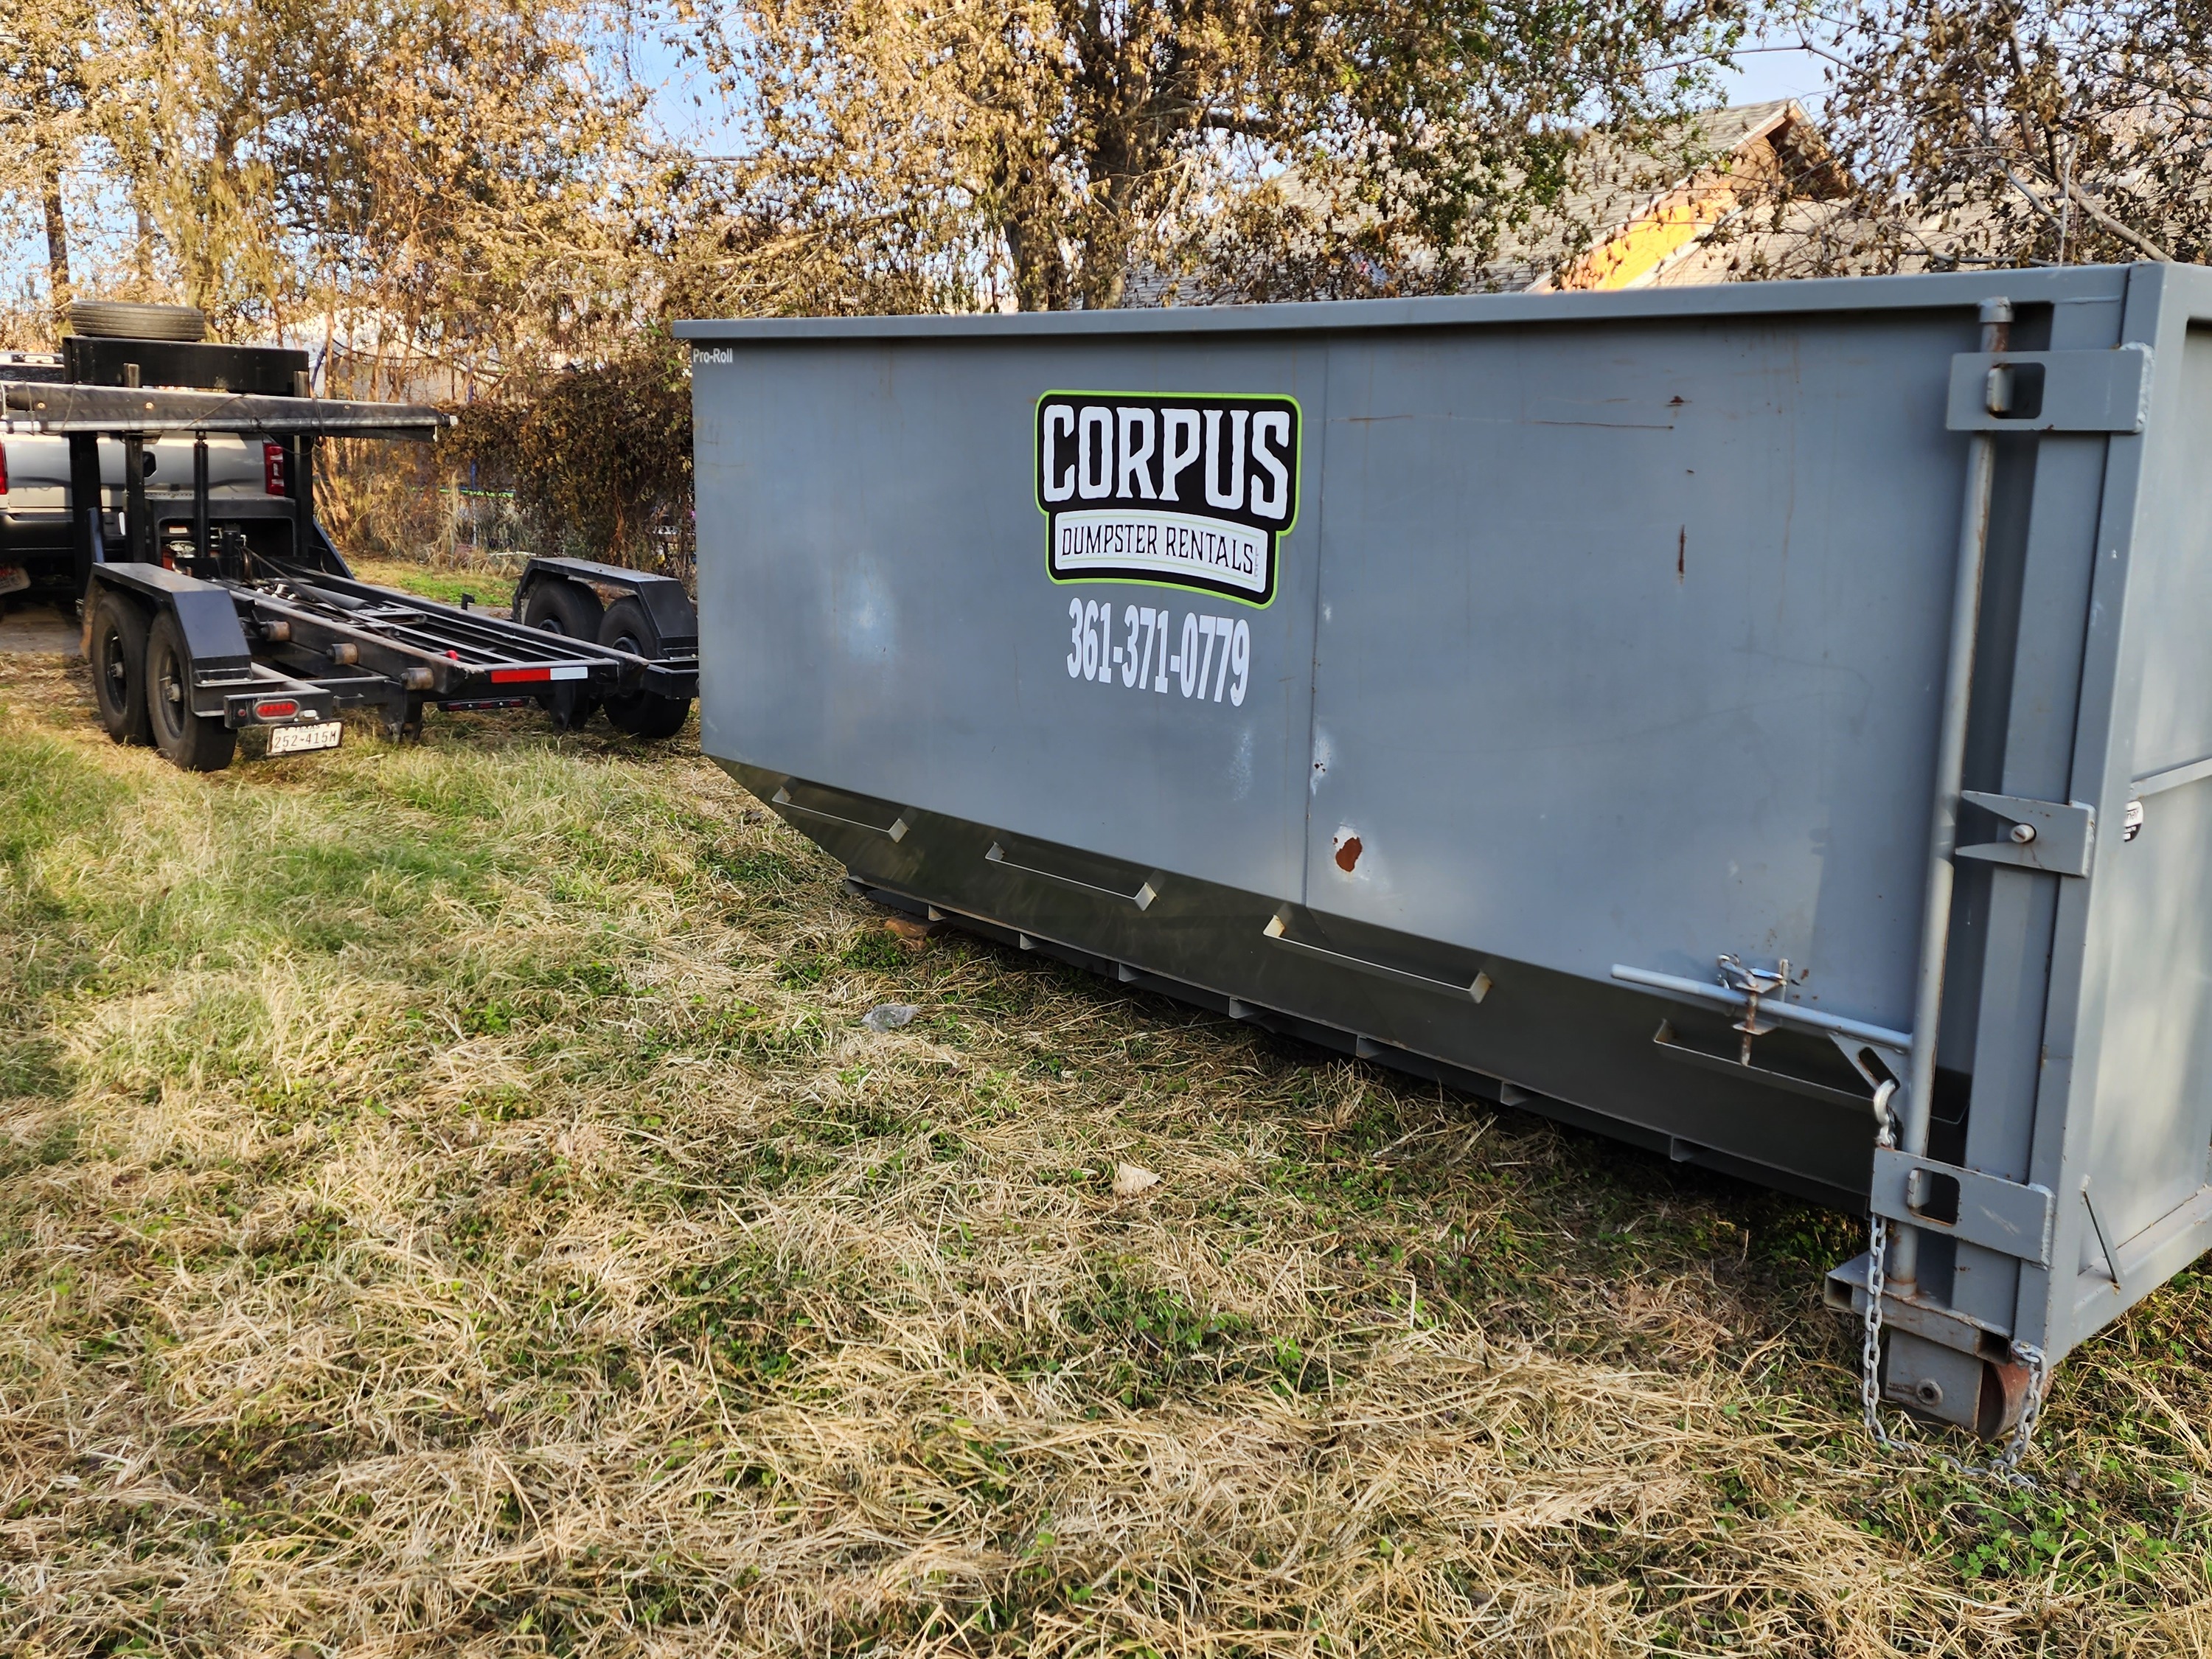 Driveway-Friendly Dumpster Rental Corpus Dumpsters Robstown TX Residents Use for Outdoor Projects and Yard Work